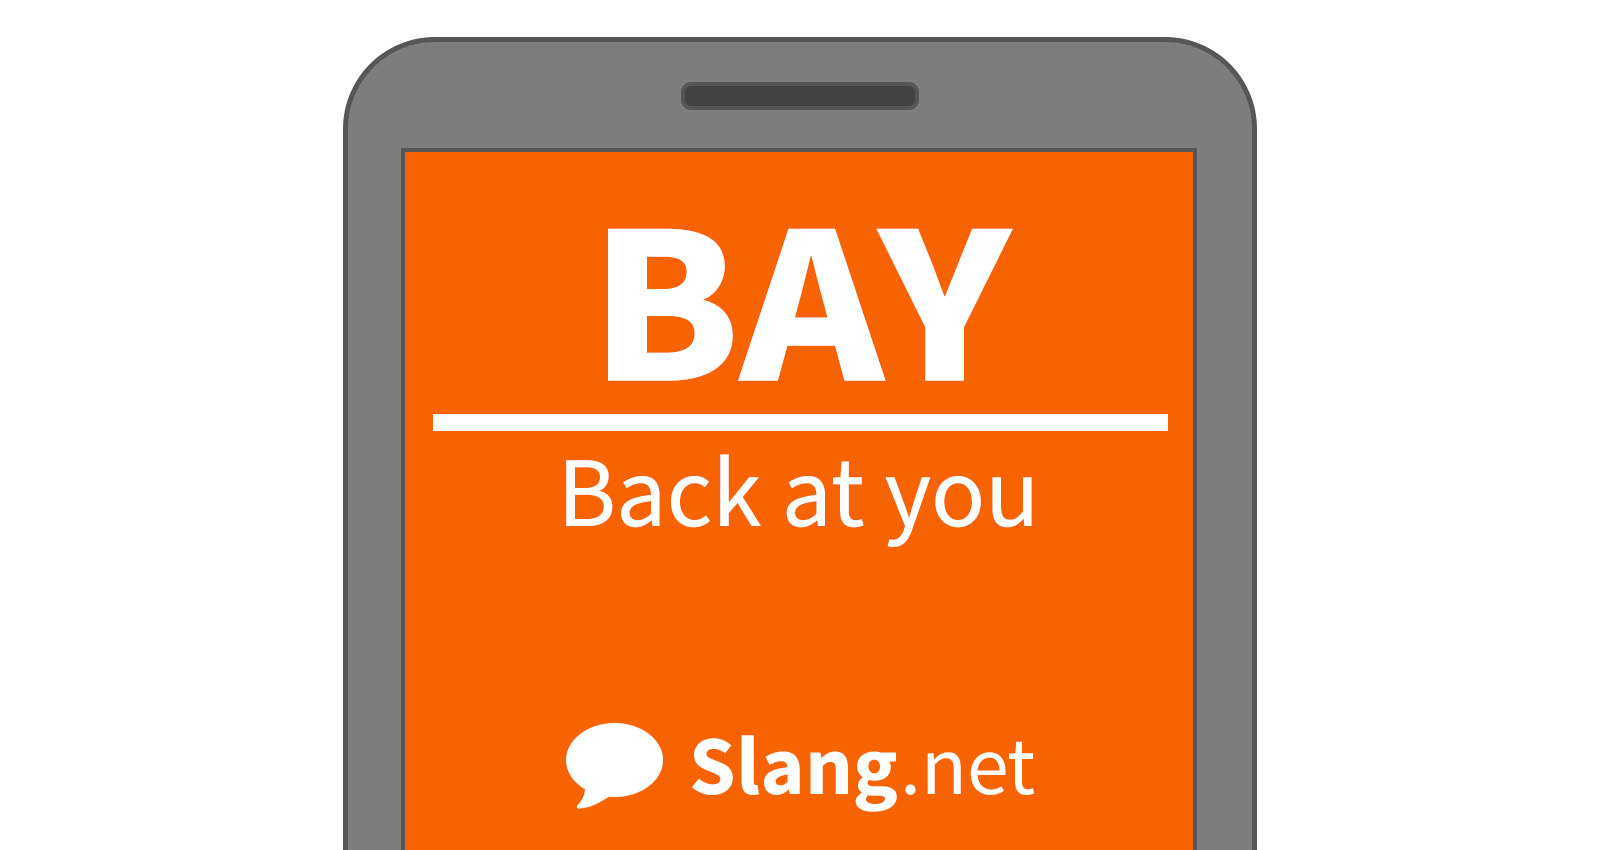 BAY stands for &quot;back at you&quot;